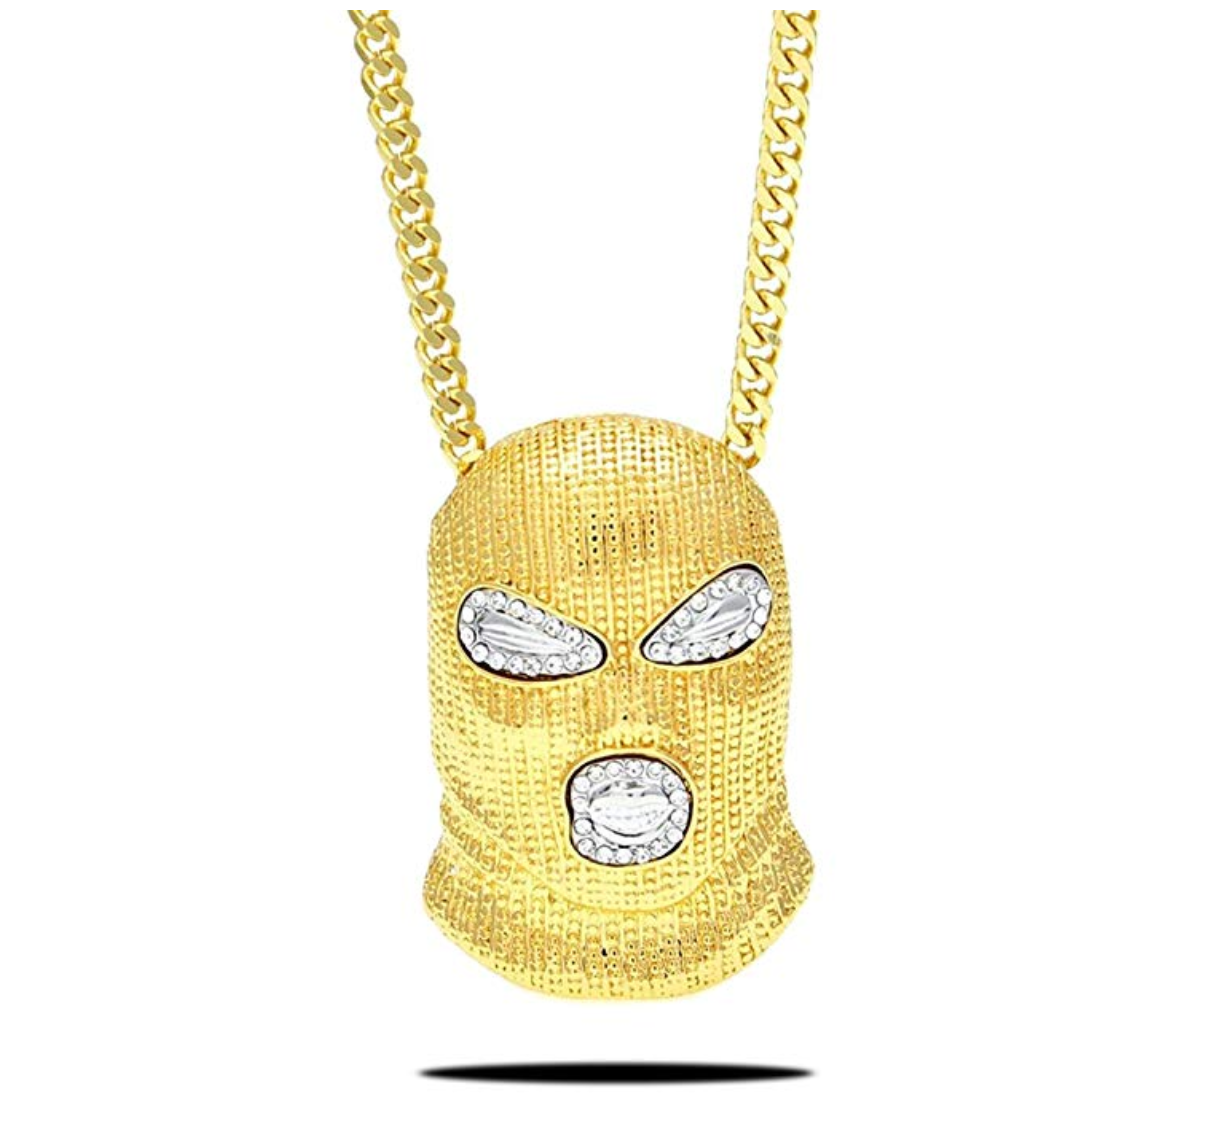 Ski Mask Chain Robber Necklace Simulated Diamond Chain Hip Hop Pendant Gun Money Bag Chain Silver Gold Color Metal Alloy 24in.